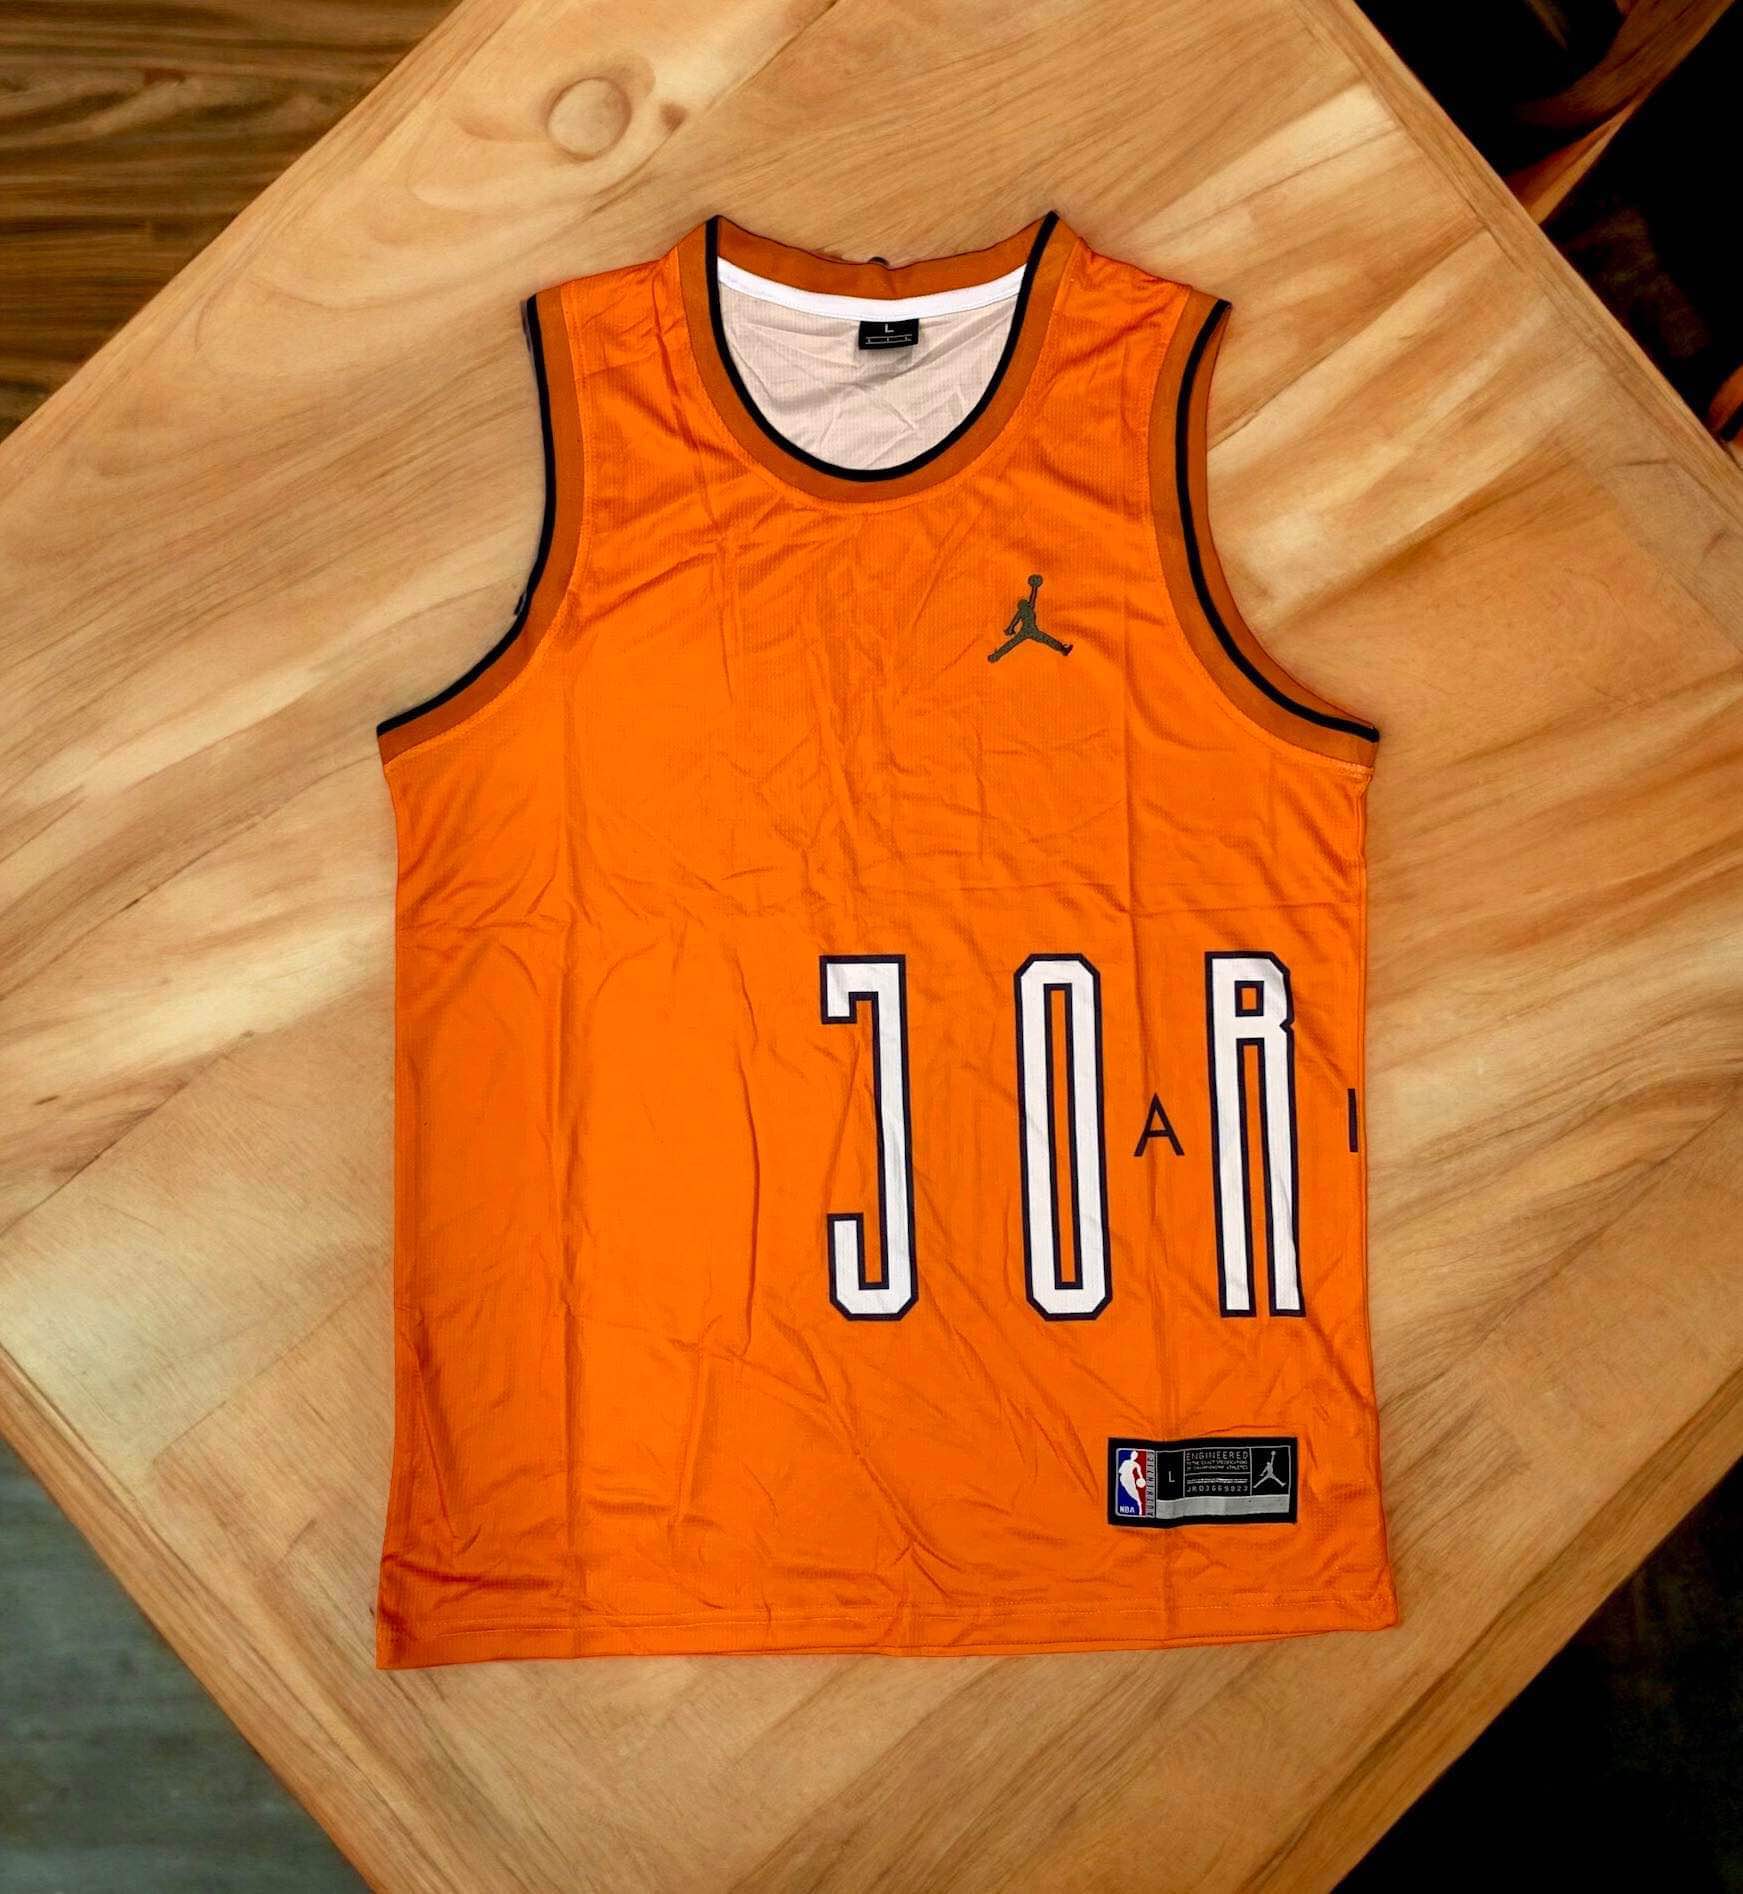 CASTLE new design basketball jersey sando good quality muscle sports  outdoor jersey #ZY02